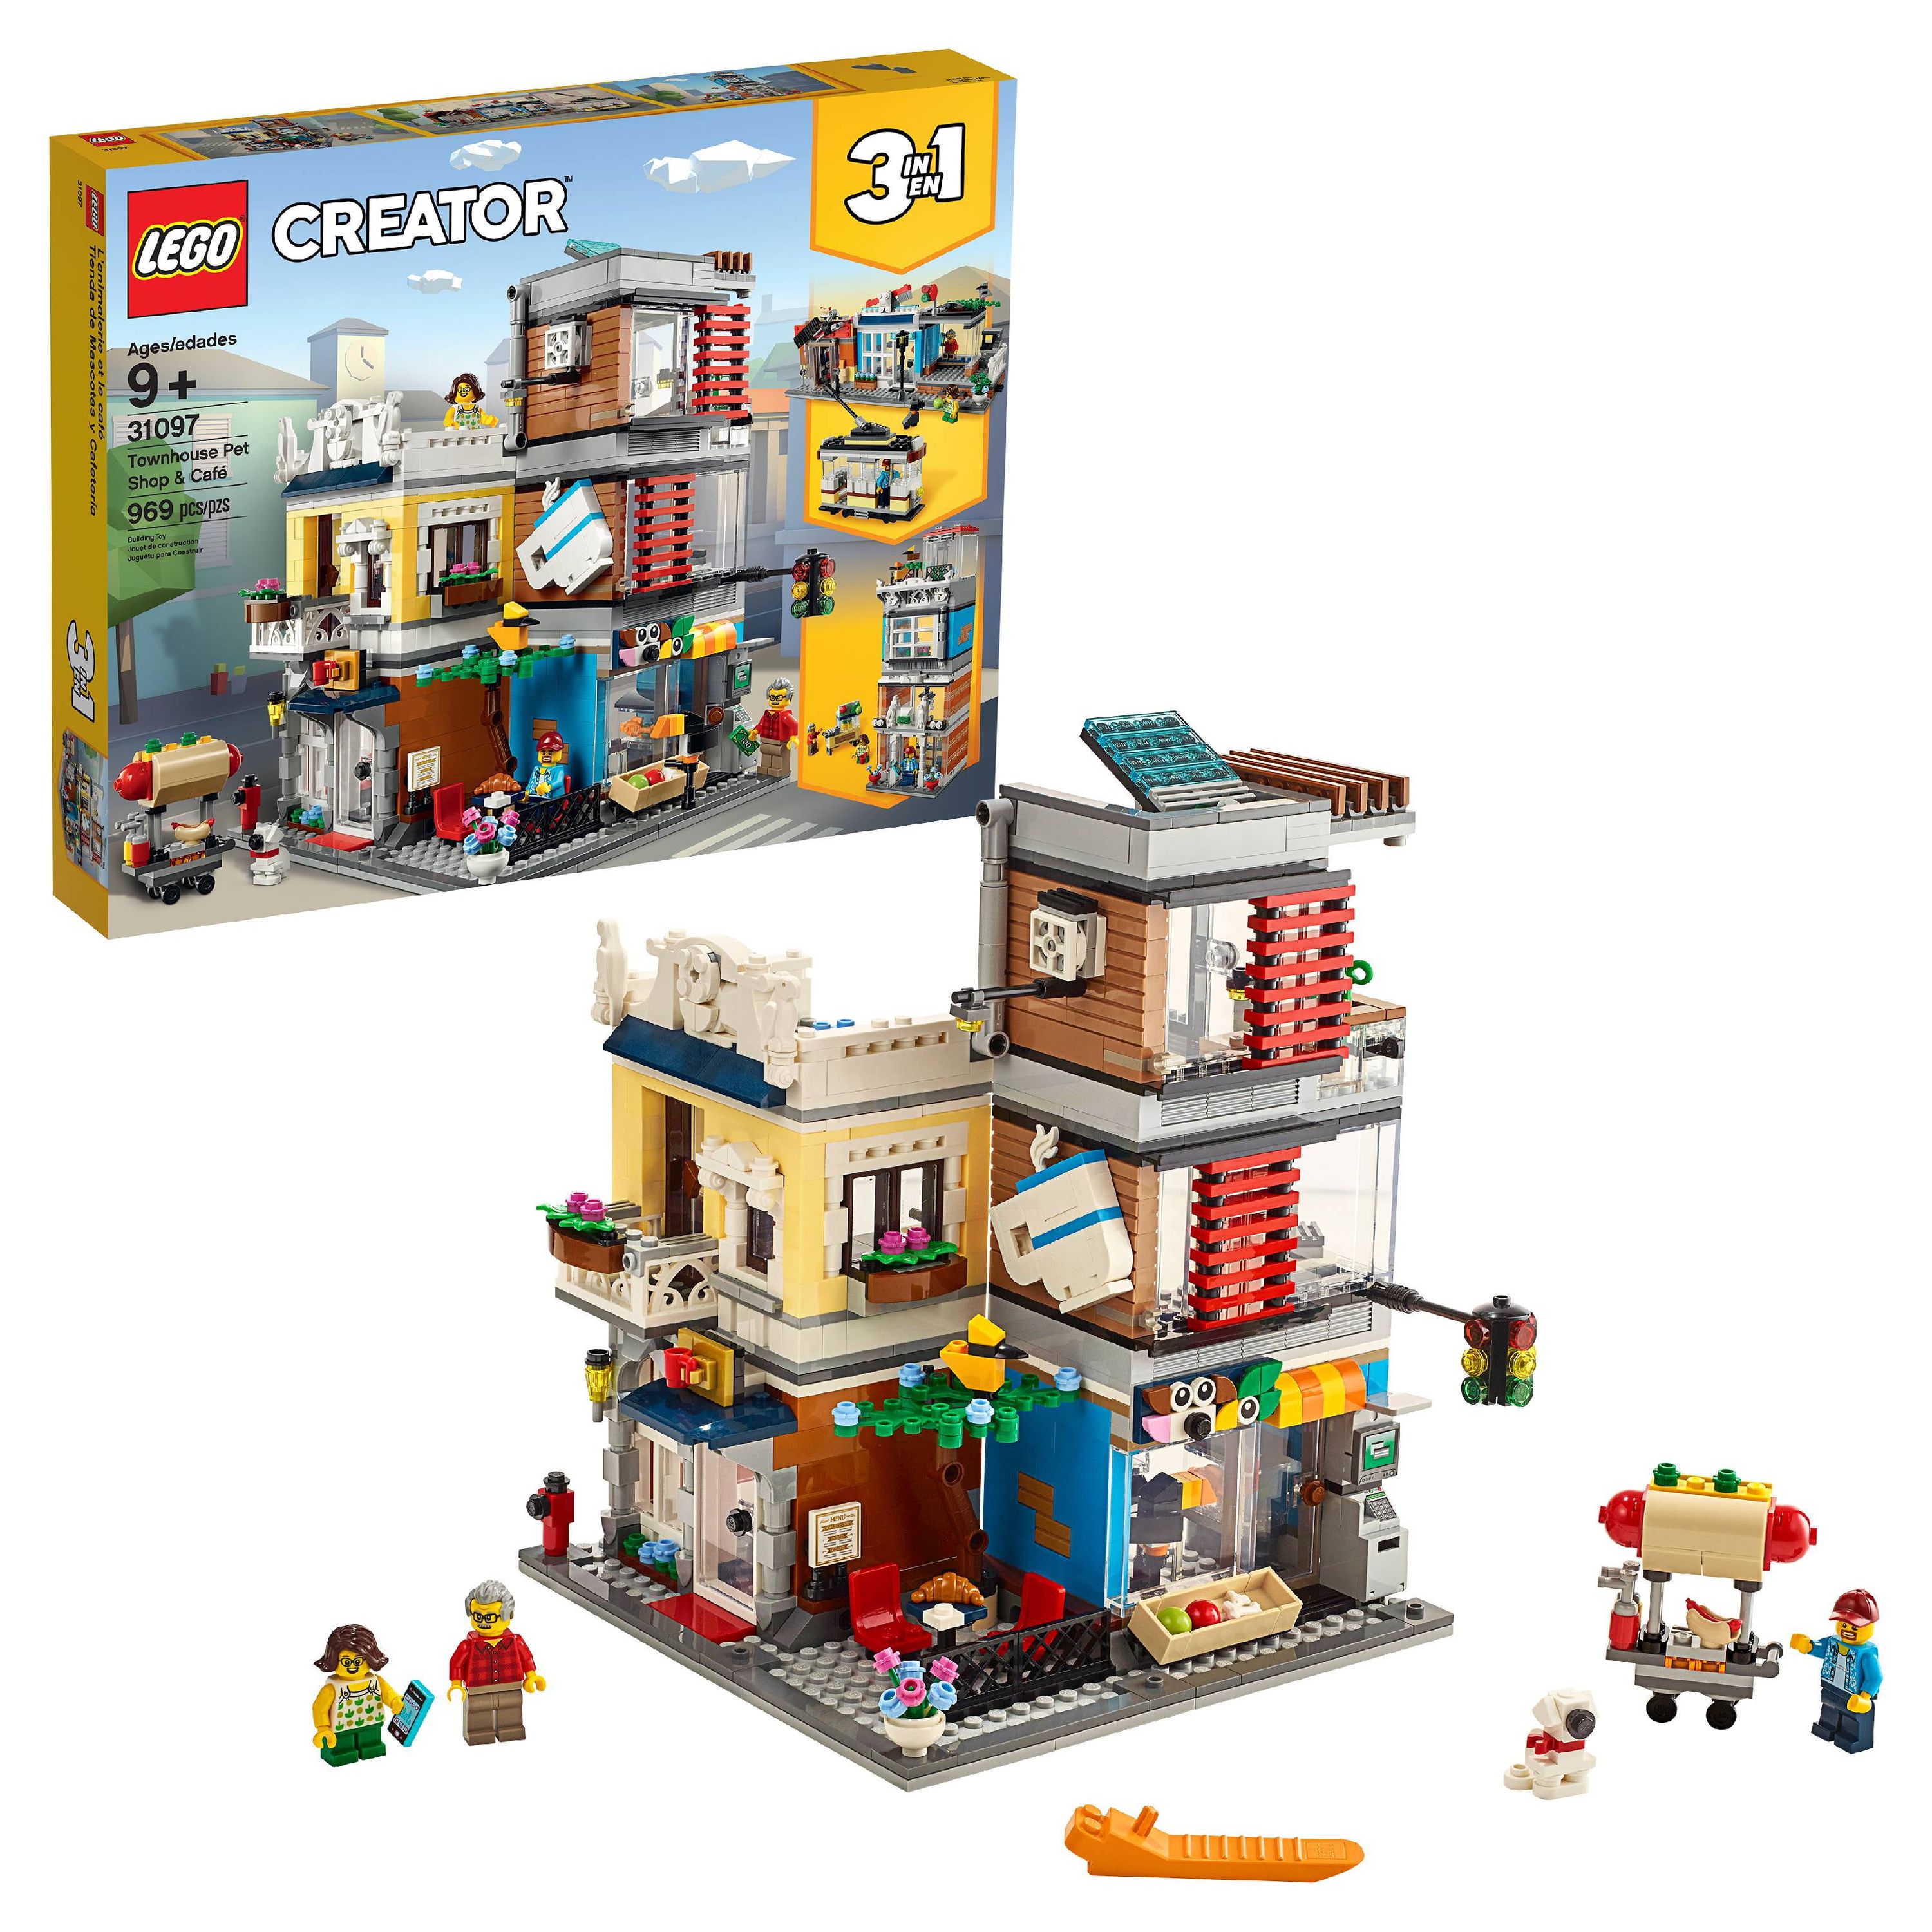 LEGO Creator 3-in-1 Townhouse Pet Shop & Cafe 31097 Store Building Set - image 1 of 8